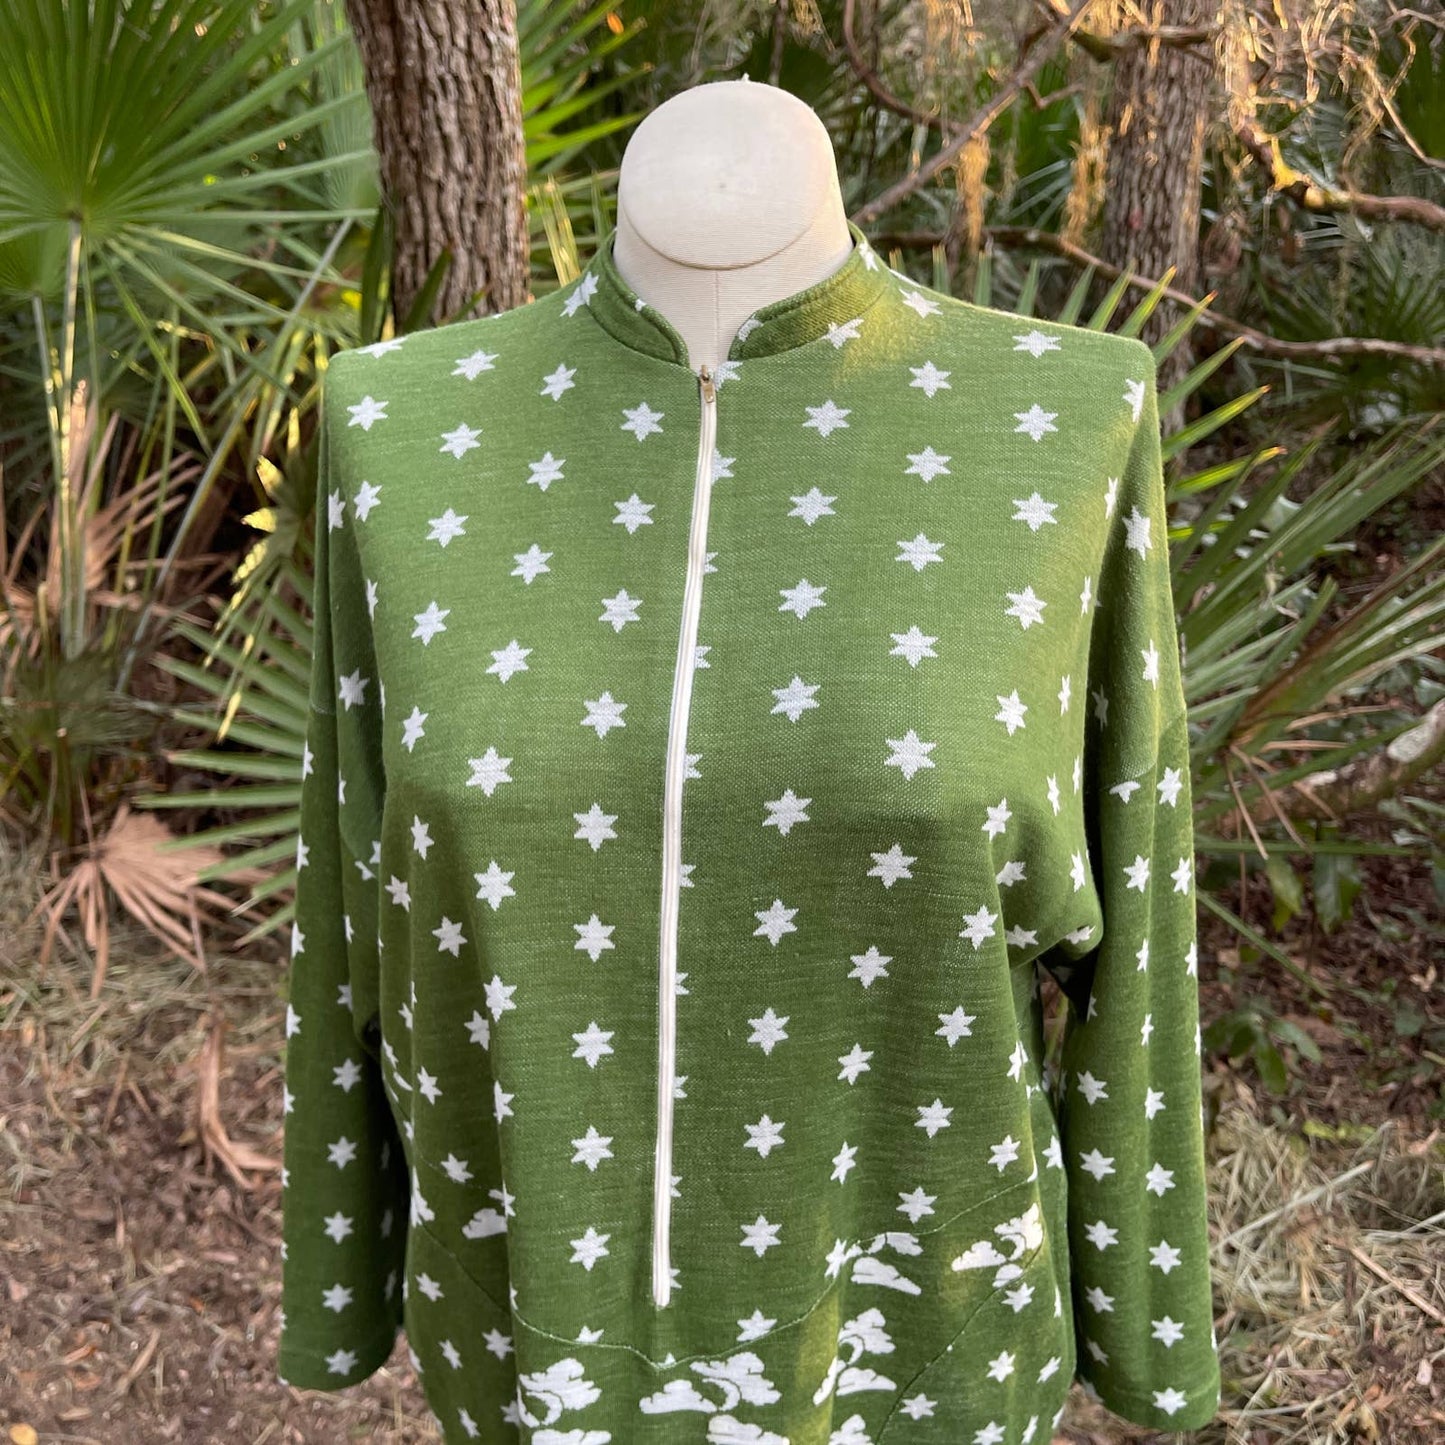 Vintage 70s Star Moon and Cloud Green Knit Lounge Dress Zip Front Size M L XL